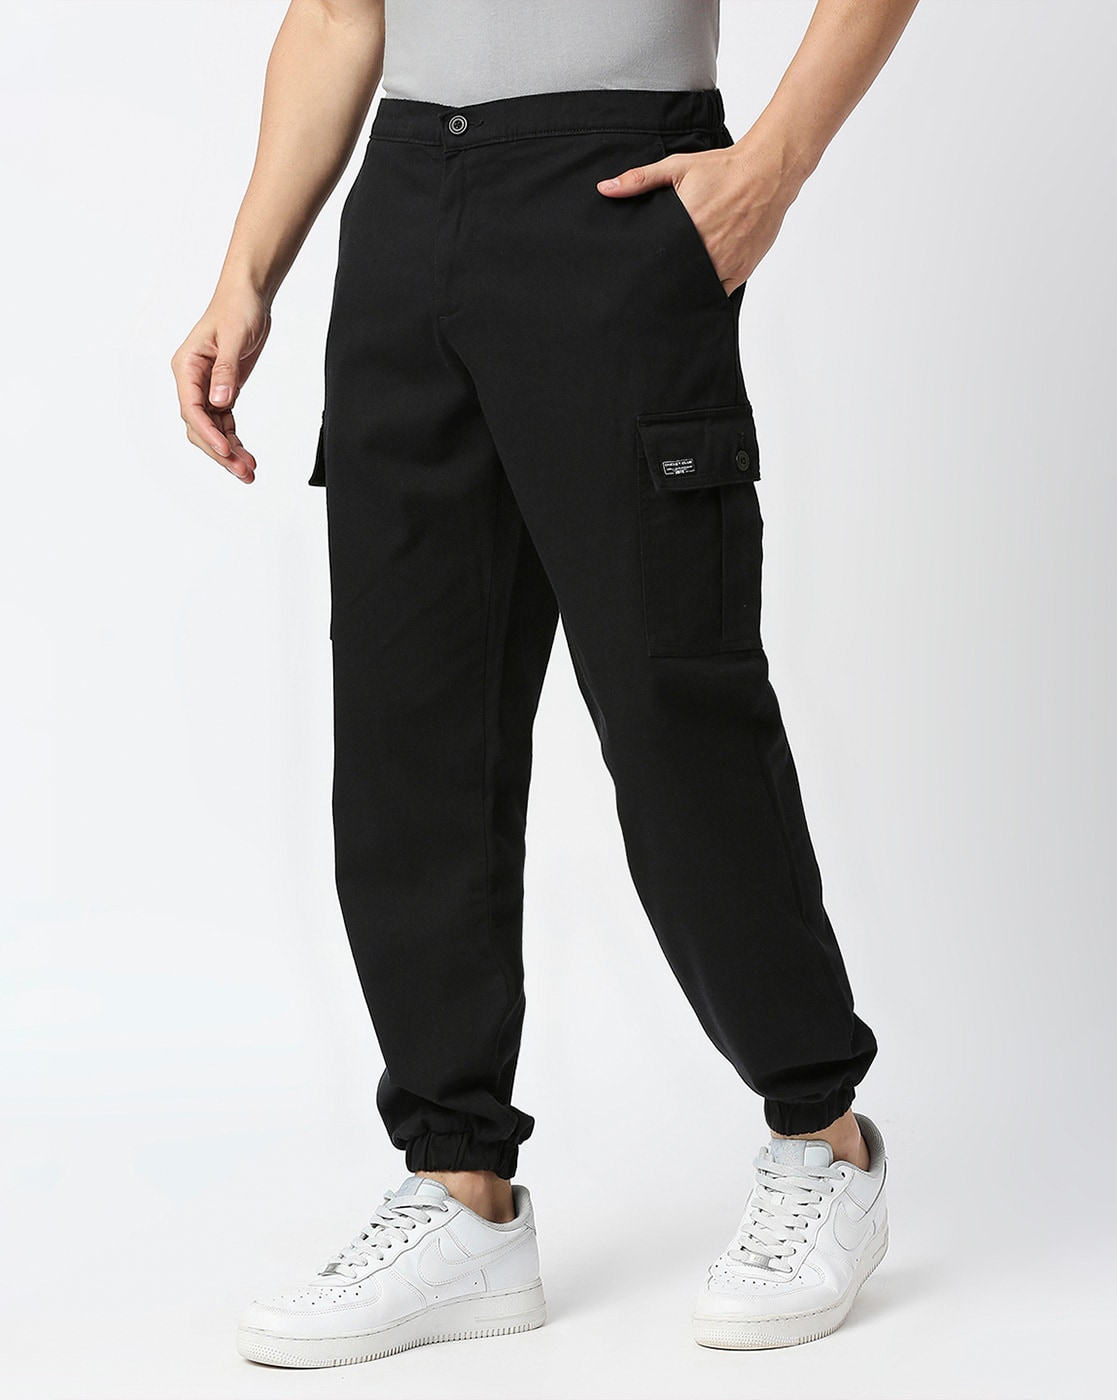 Reflective pants outfit ideas cargo pants  Satin Pants Outfit  cargo  pants Silk Pant Outfits yellow outfit